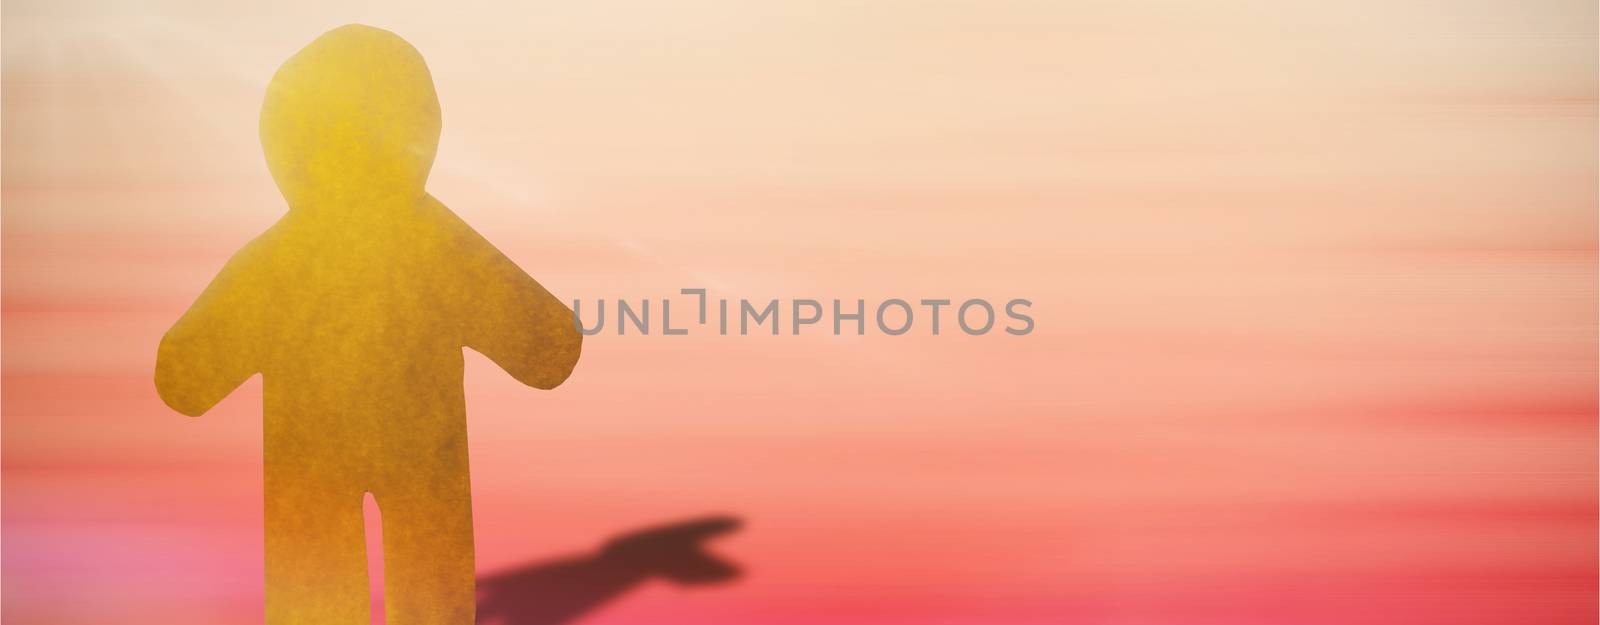 Composite image of little yellow man by Wavebreakmedia